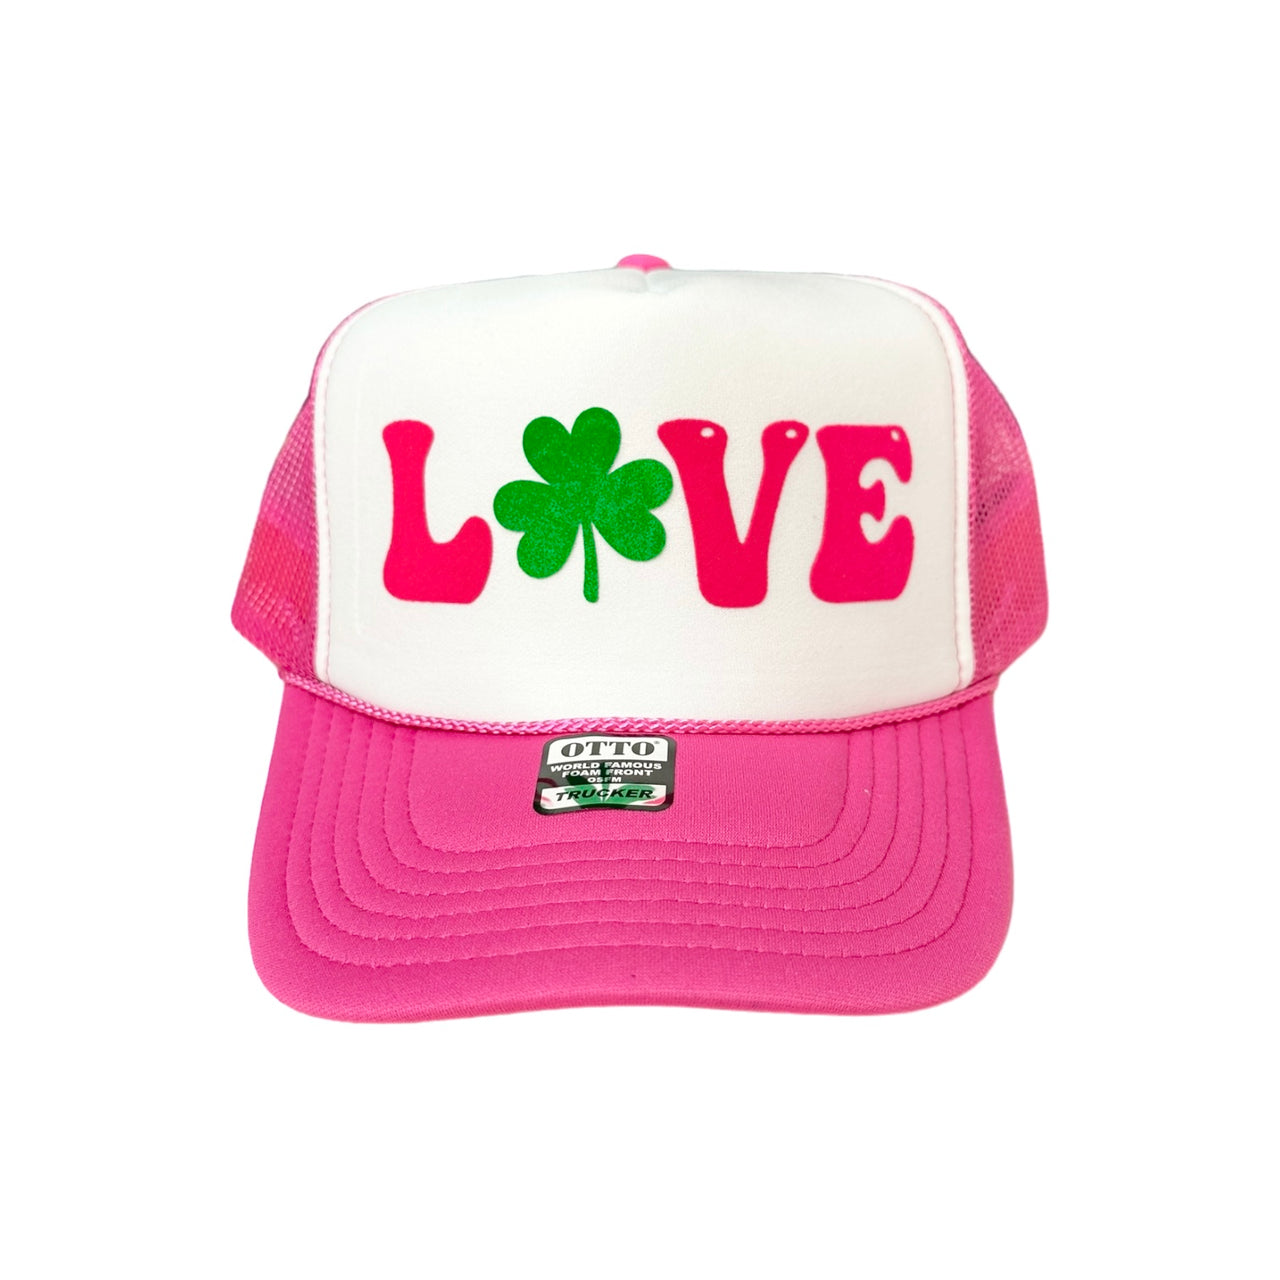 LOVE with clover - White/Pink Trucker